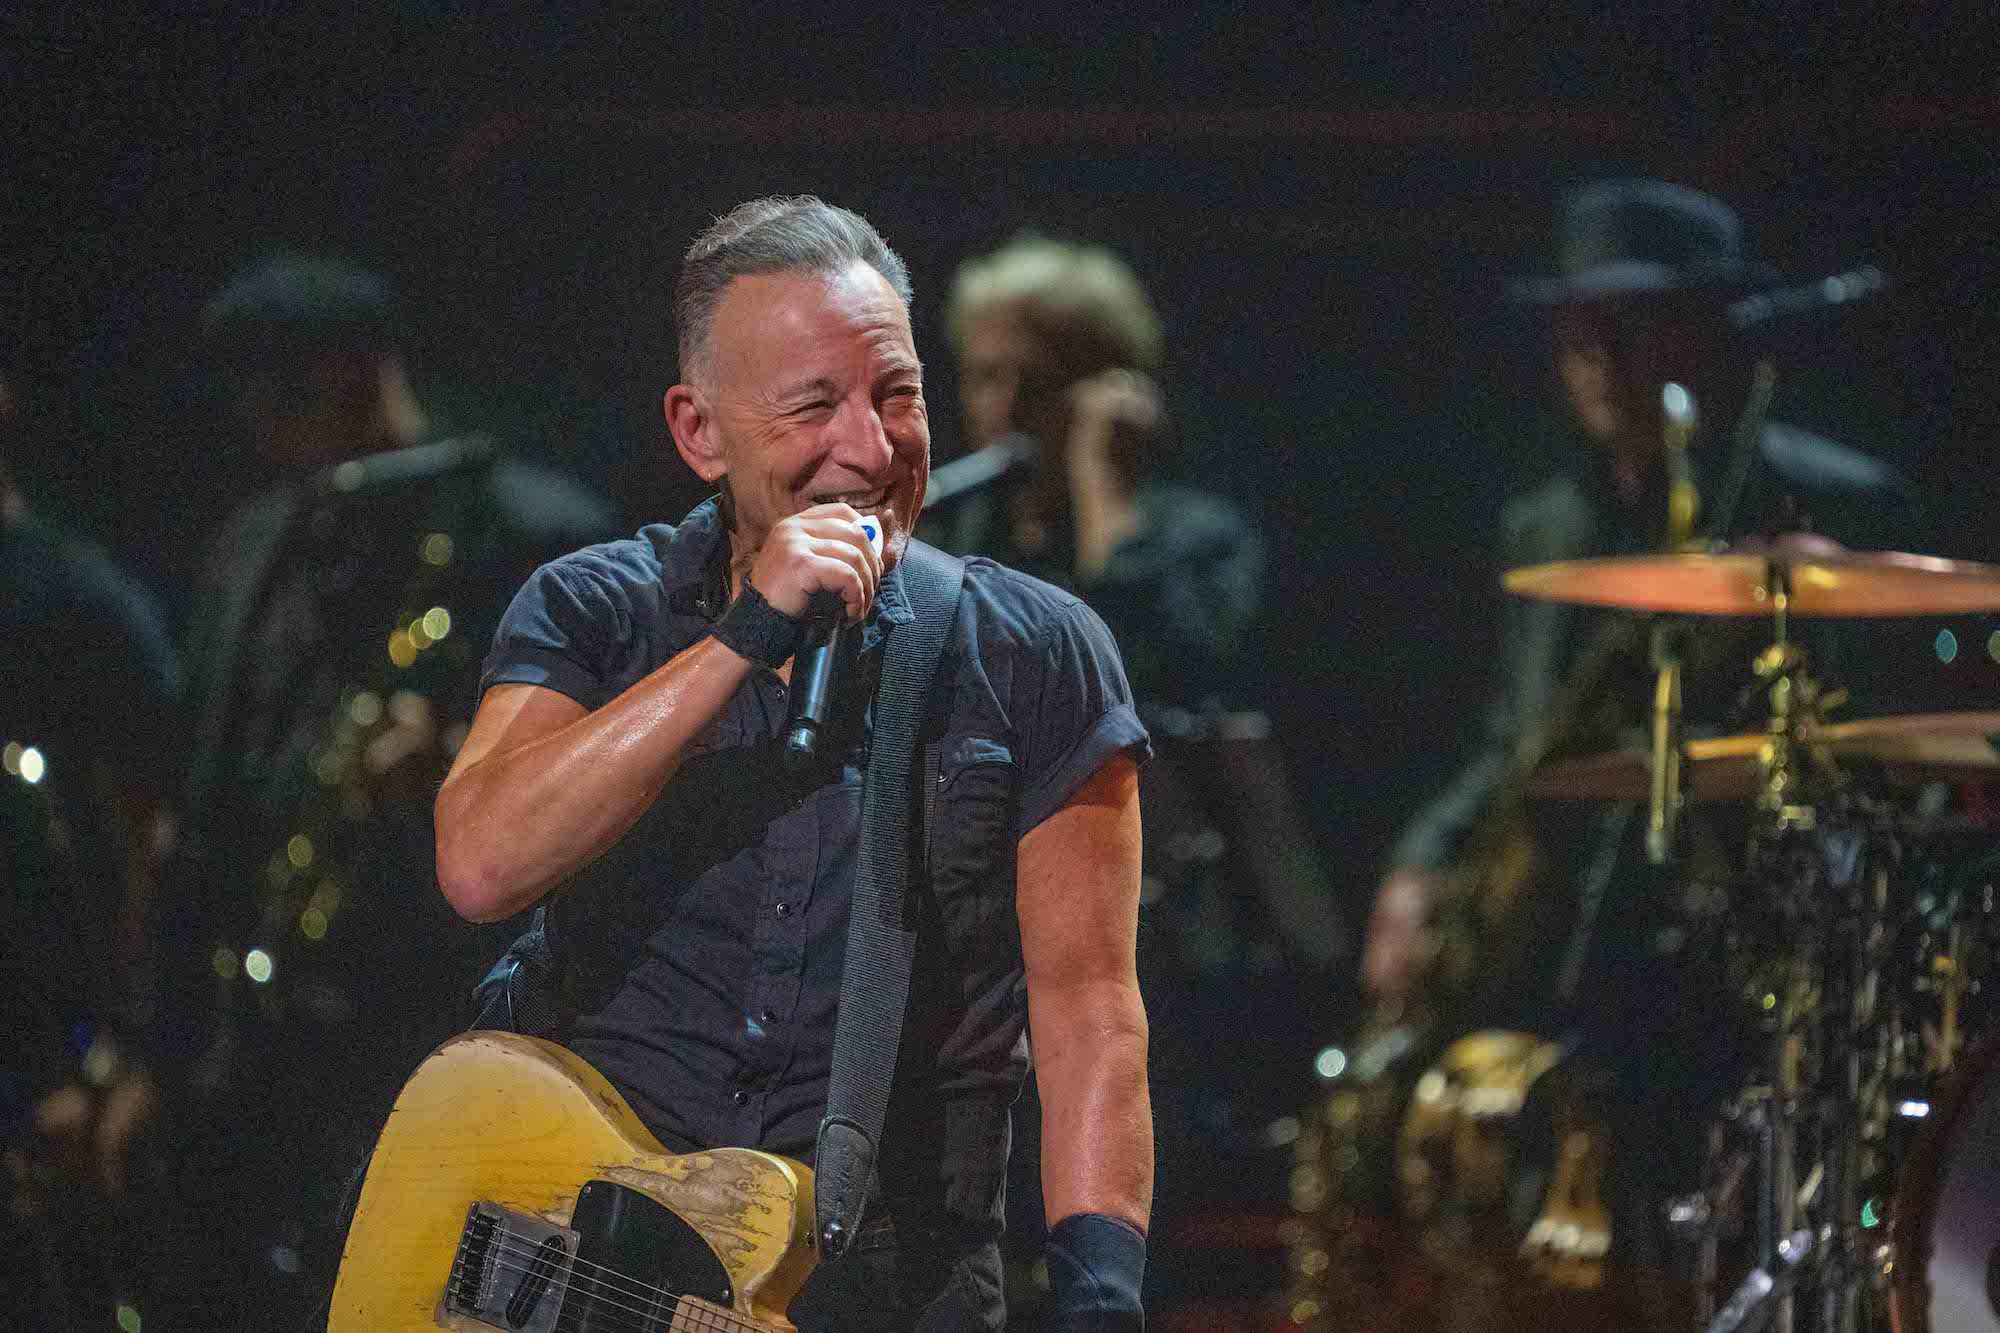 Bruce Springsteen & E Street Band at Amway Center, Orlando, Florida on February 5, 2023.